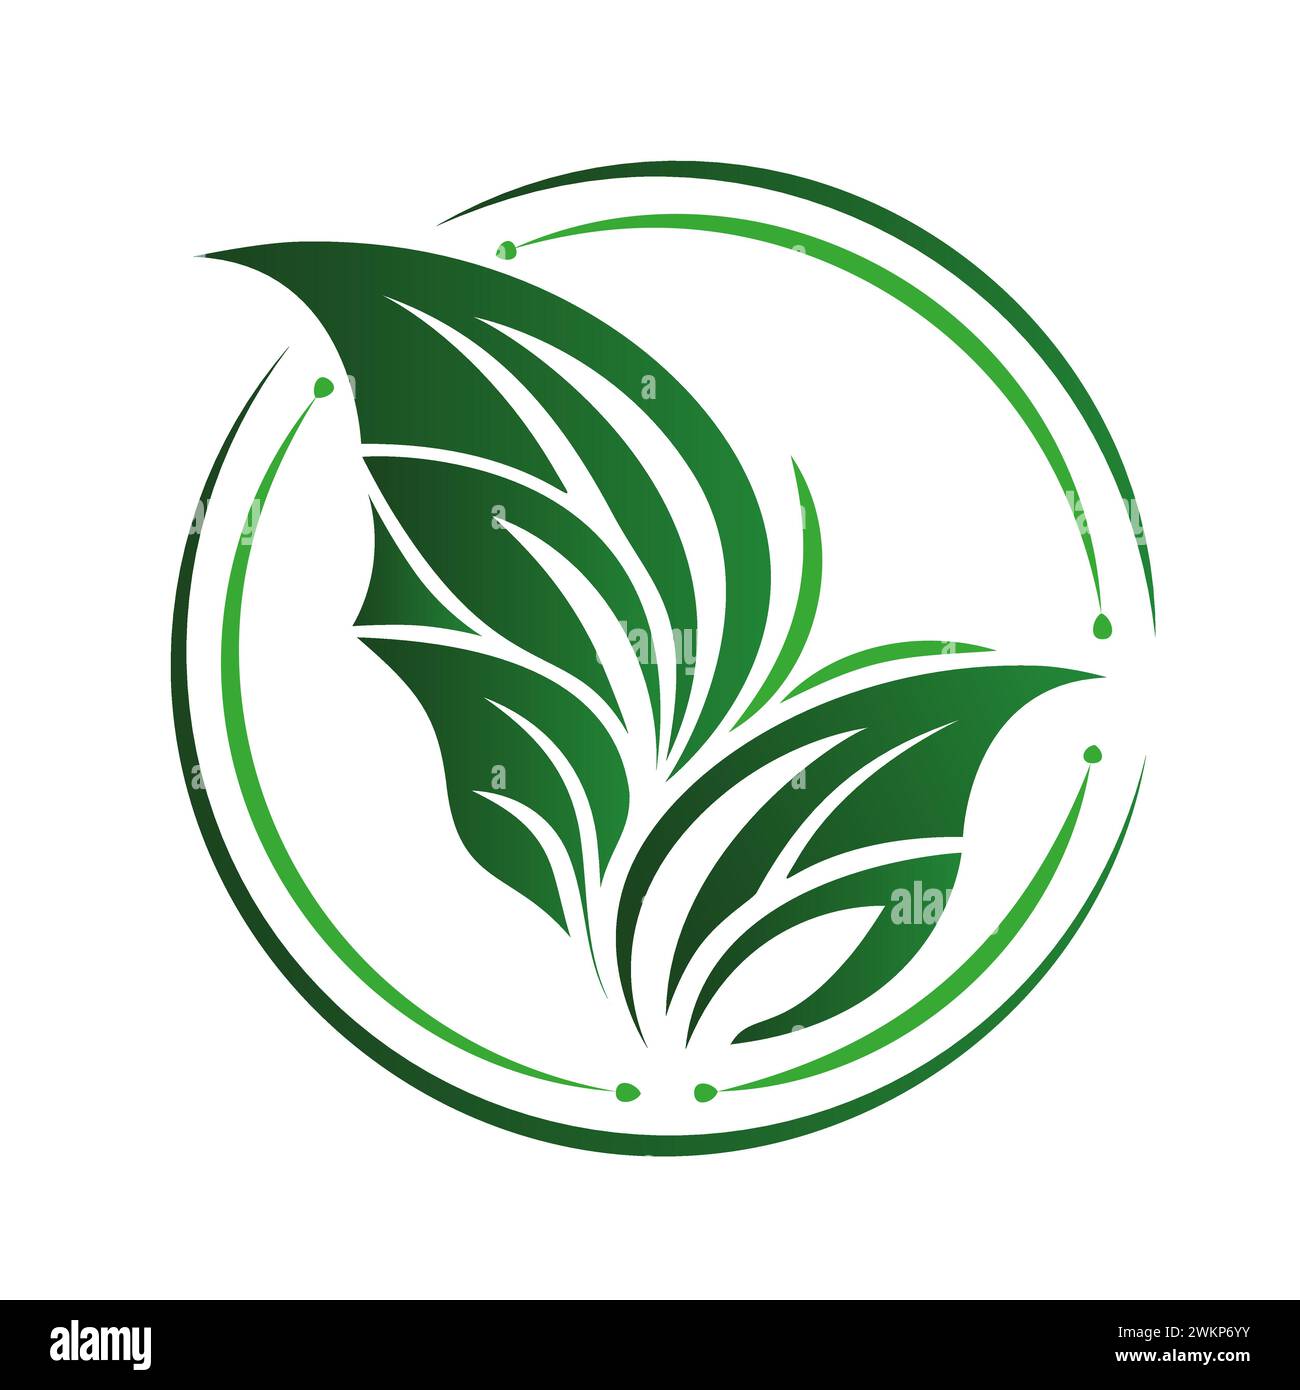 A simple, stylized green leaf logo representing nature, growth, and sustainability. Stock Vector